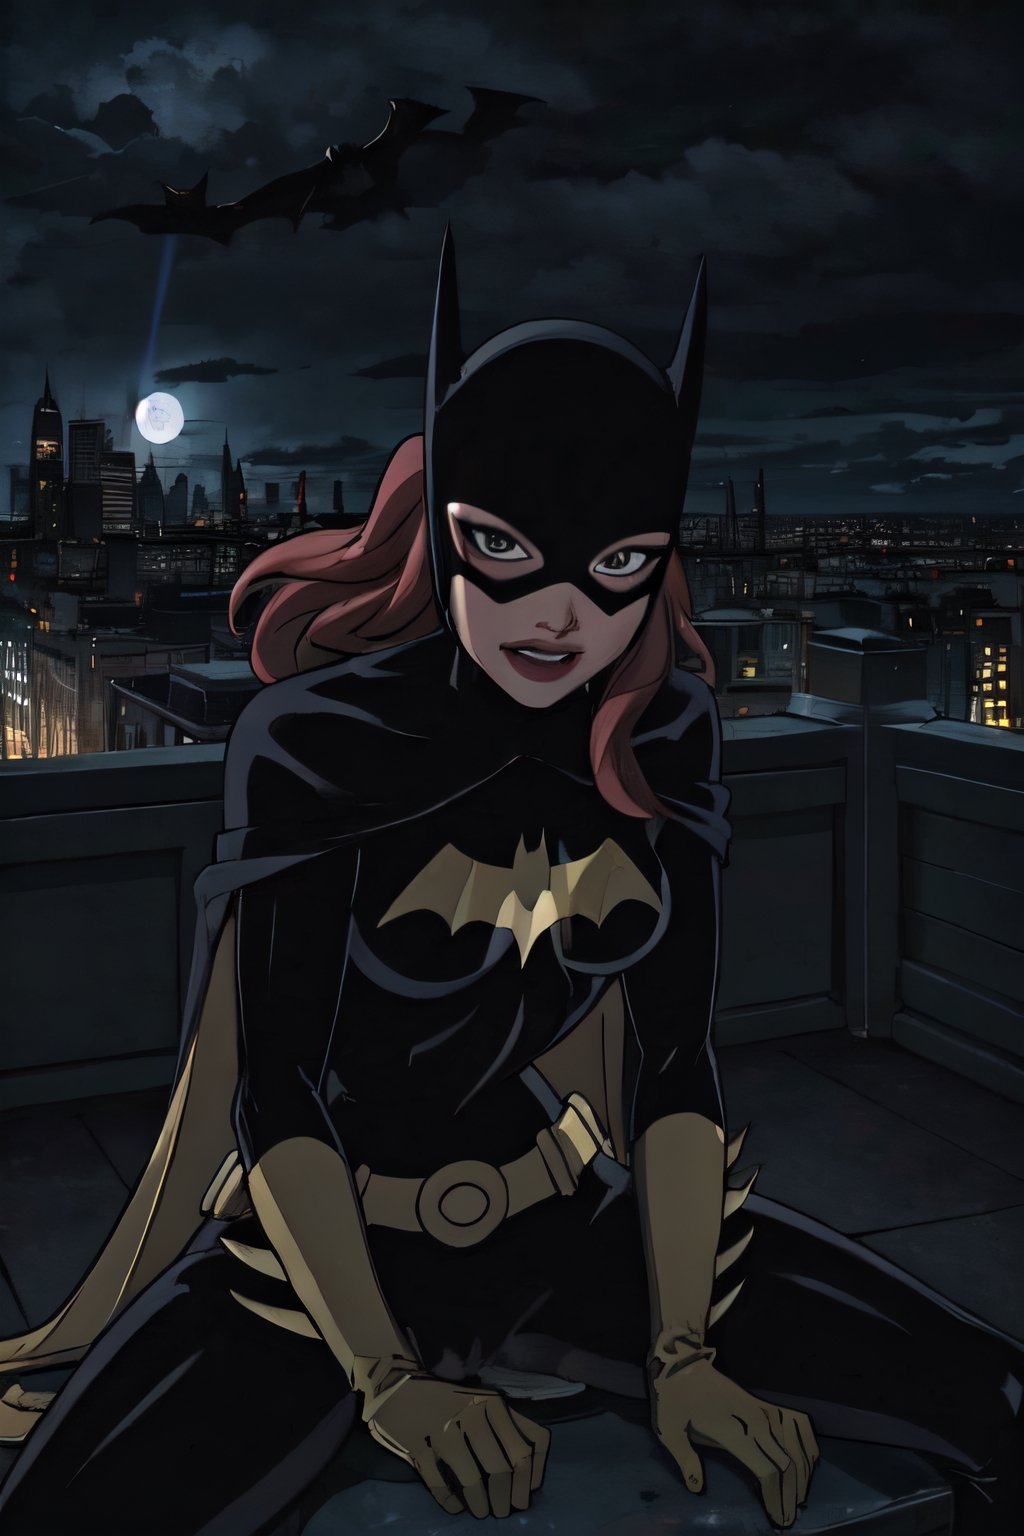 Batgirl, facial portrait, sexy stare, anal portrait, Spreading legs, on top of building, city below, cloudy sky, lightning, full moon, bats flying, smiling 